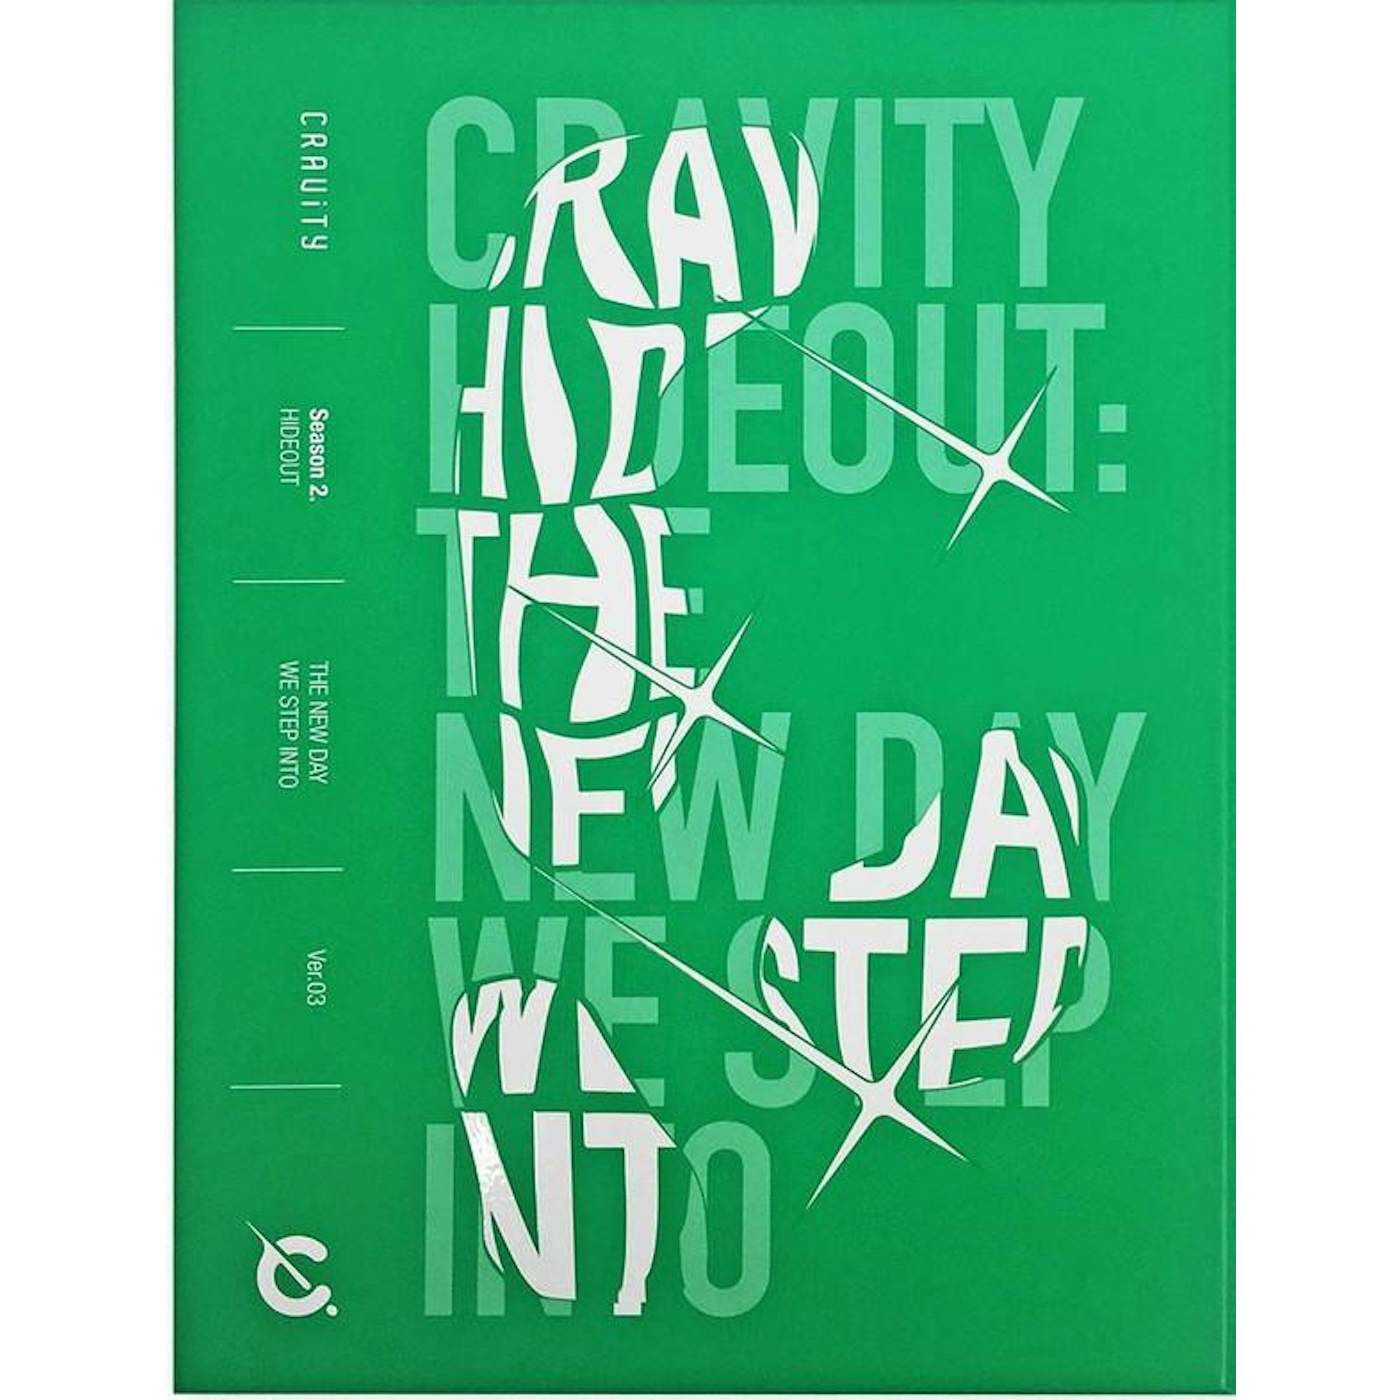 HIDEOUT: THE NEW DAY WE STEP INTO (CRAVITY SEASON2.) CD